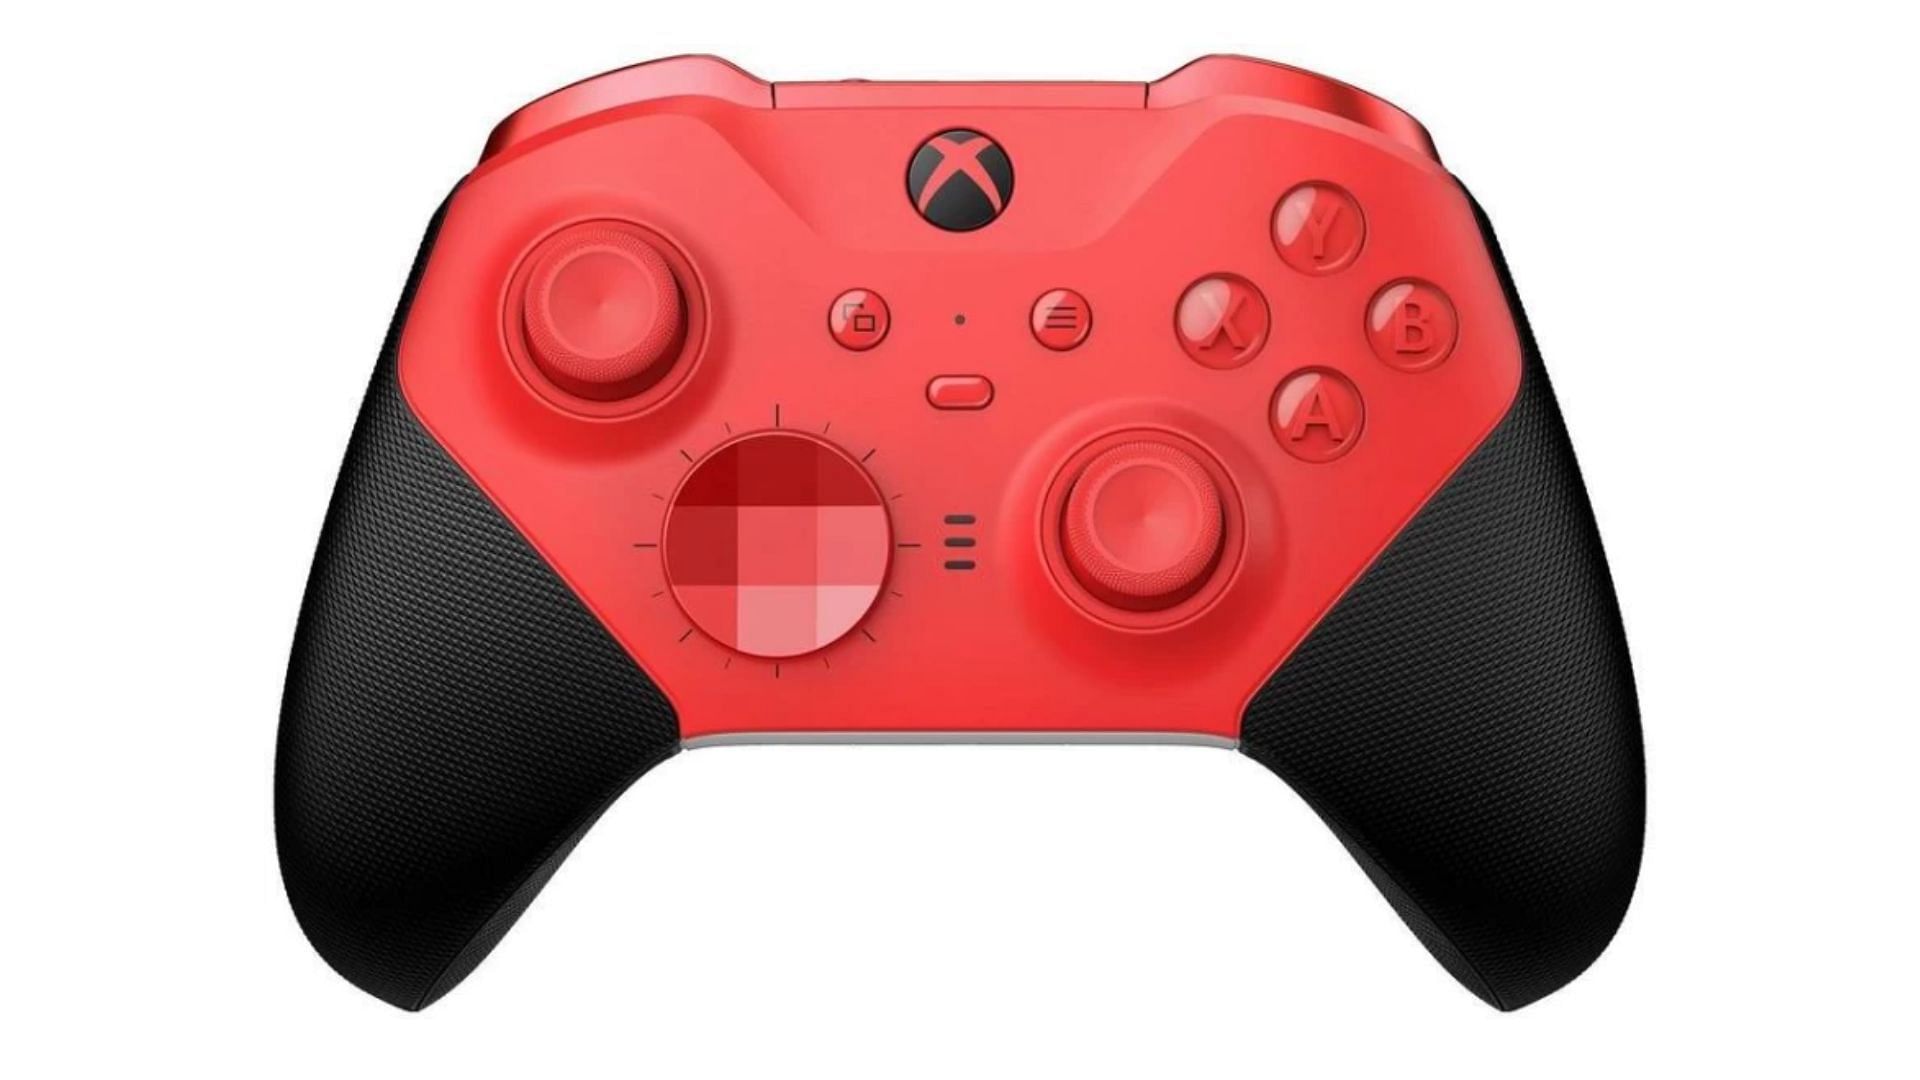 Featured-pack gamepad by Xbox (Image via Flipkart/Xbox)